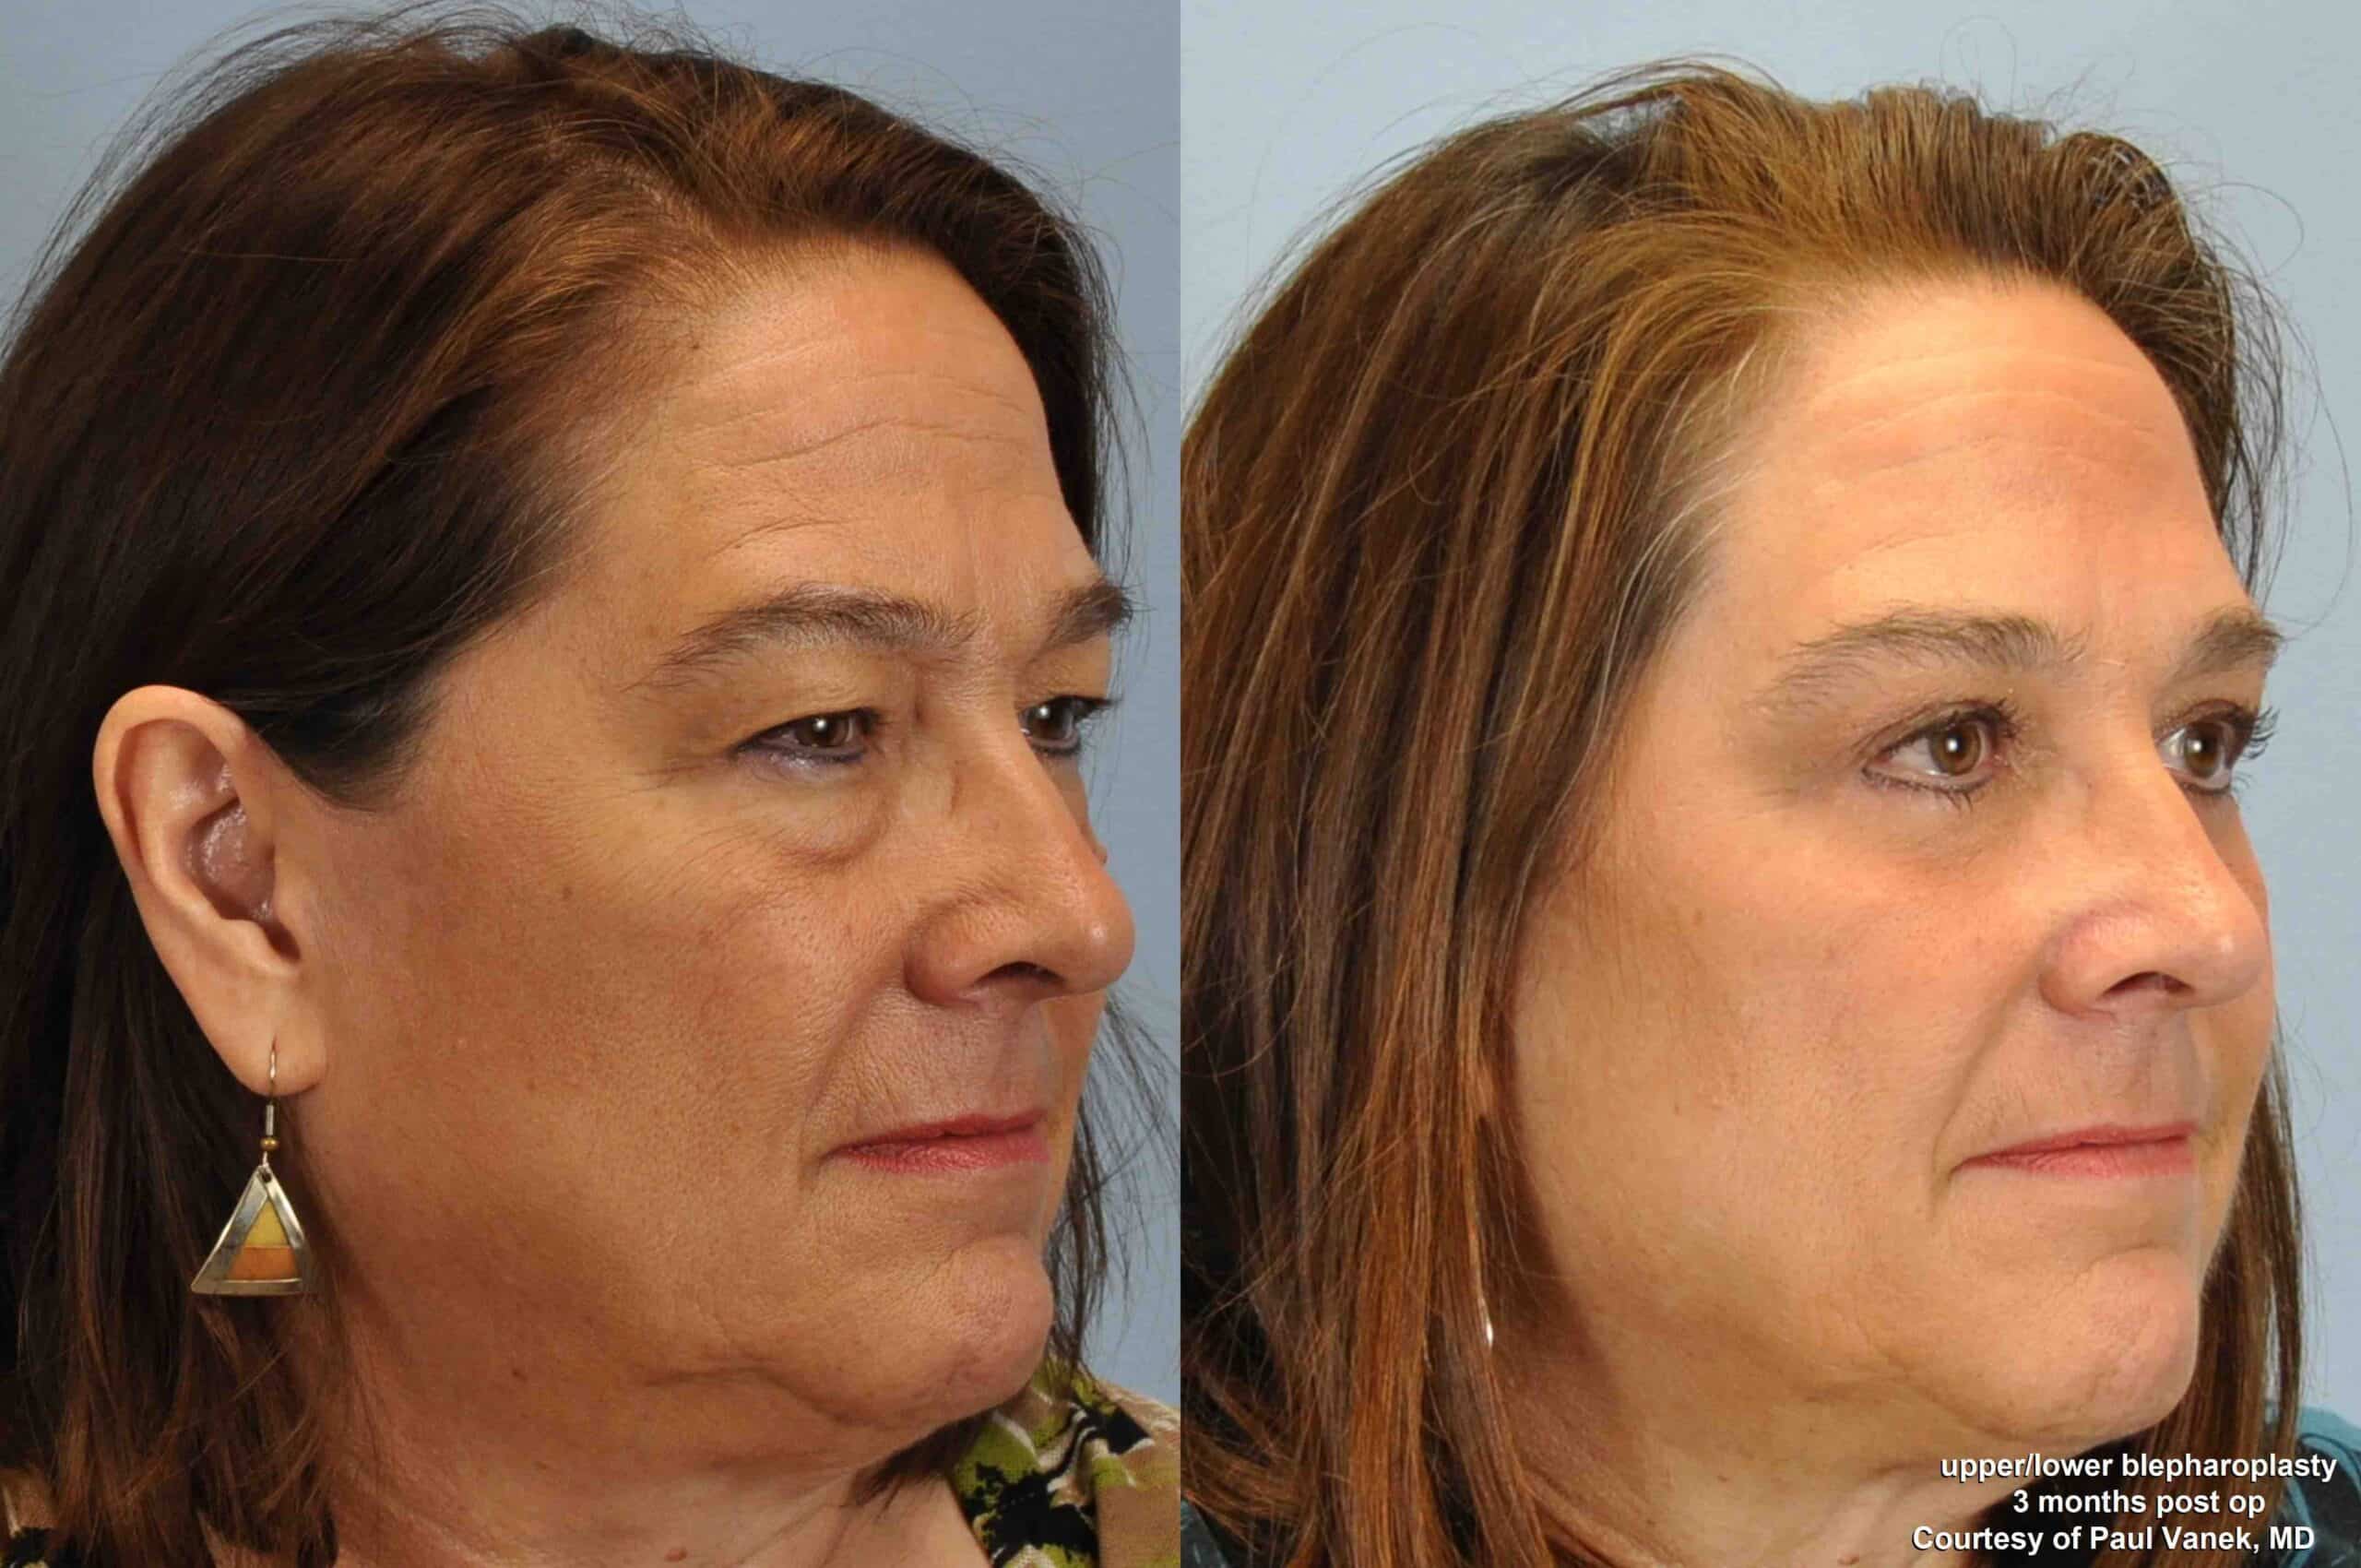 Before and after, 2 mo post op from Upper and Lower Blepharoplasty, Canthoplexy performed by Dr. Paul Vanek (diagonal view)